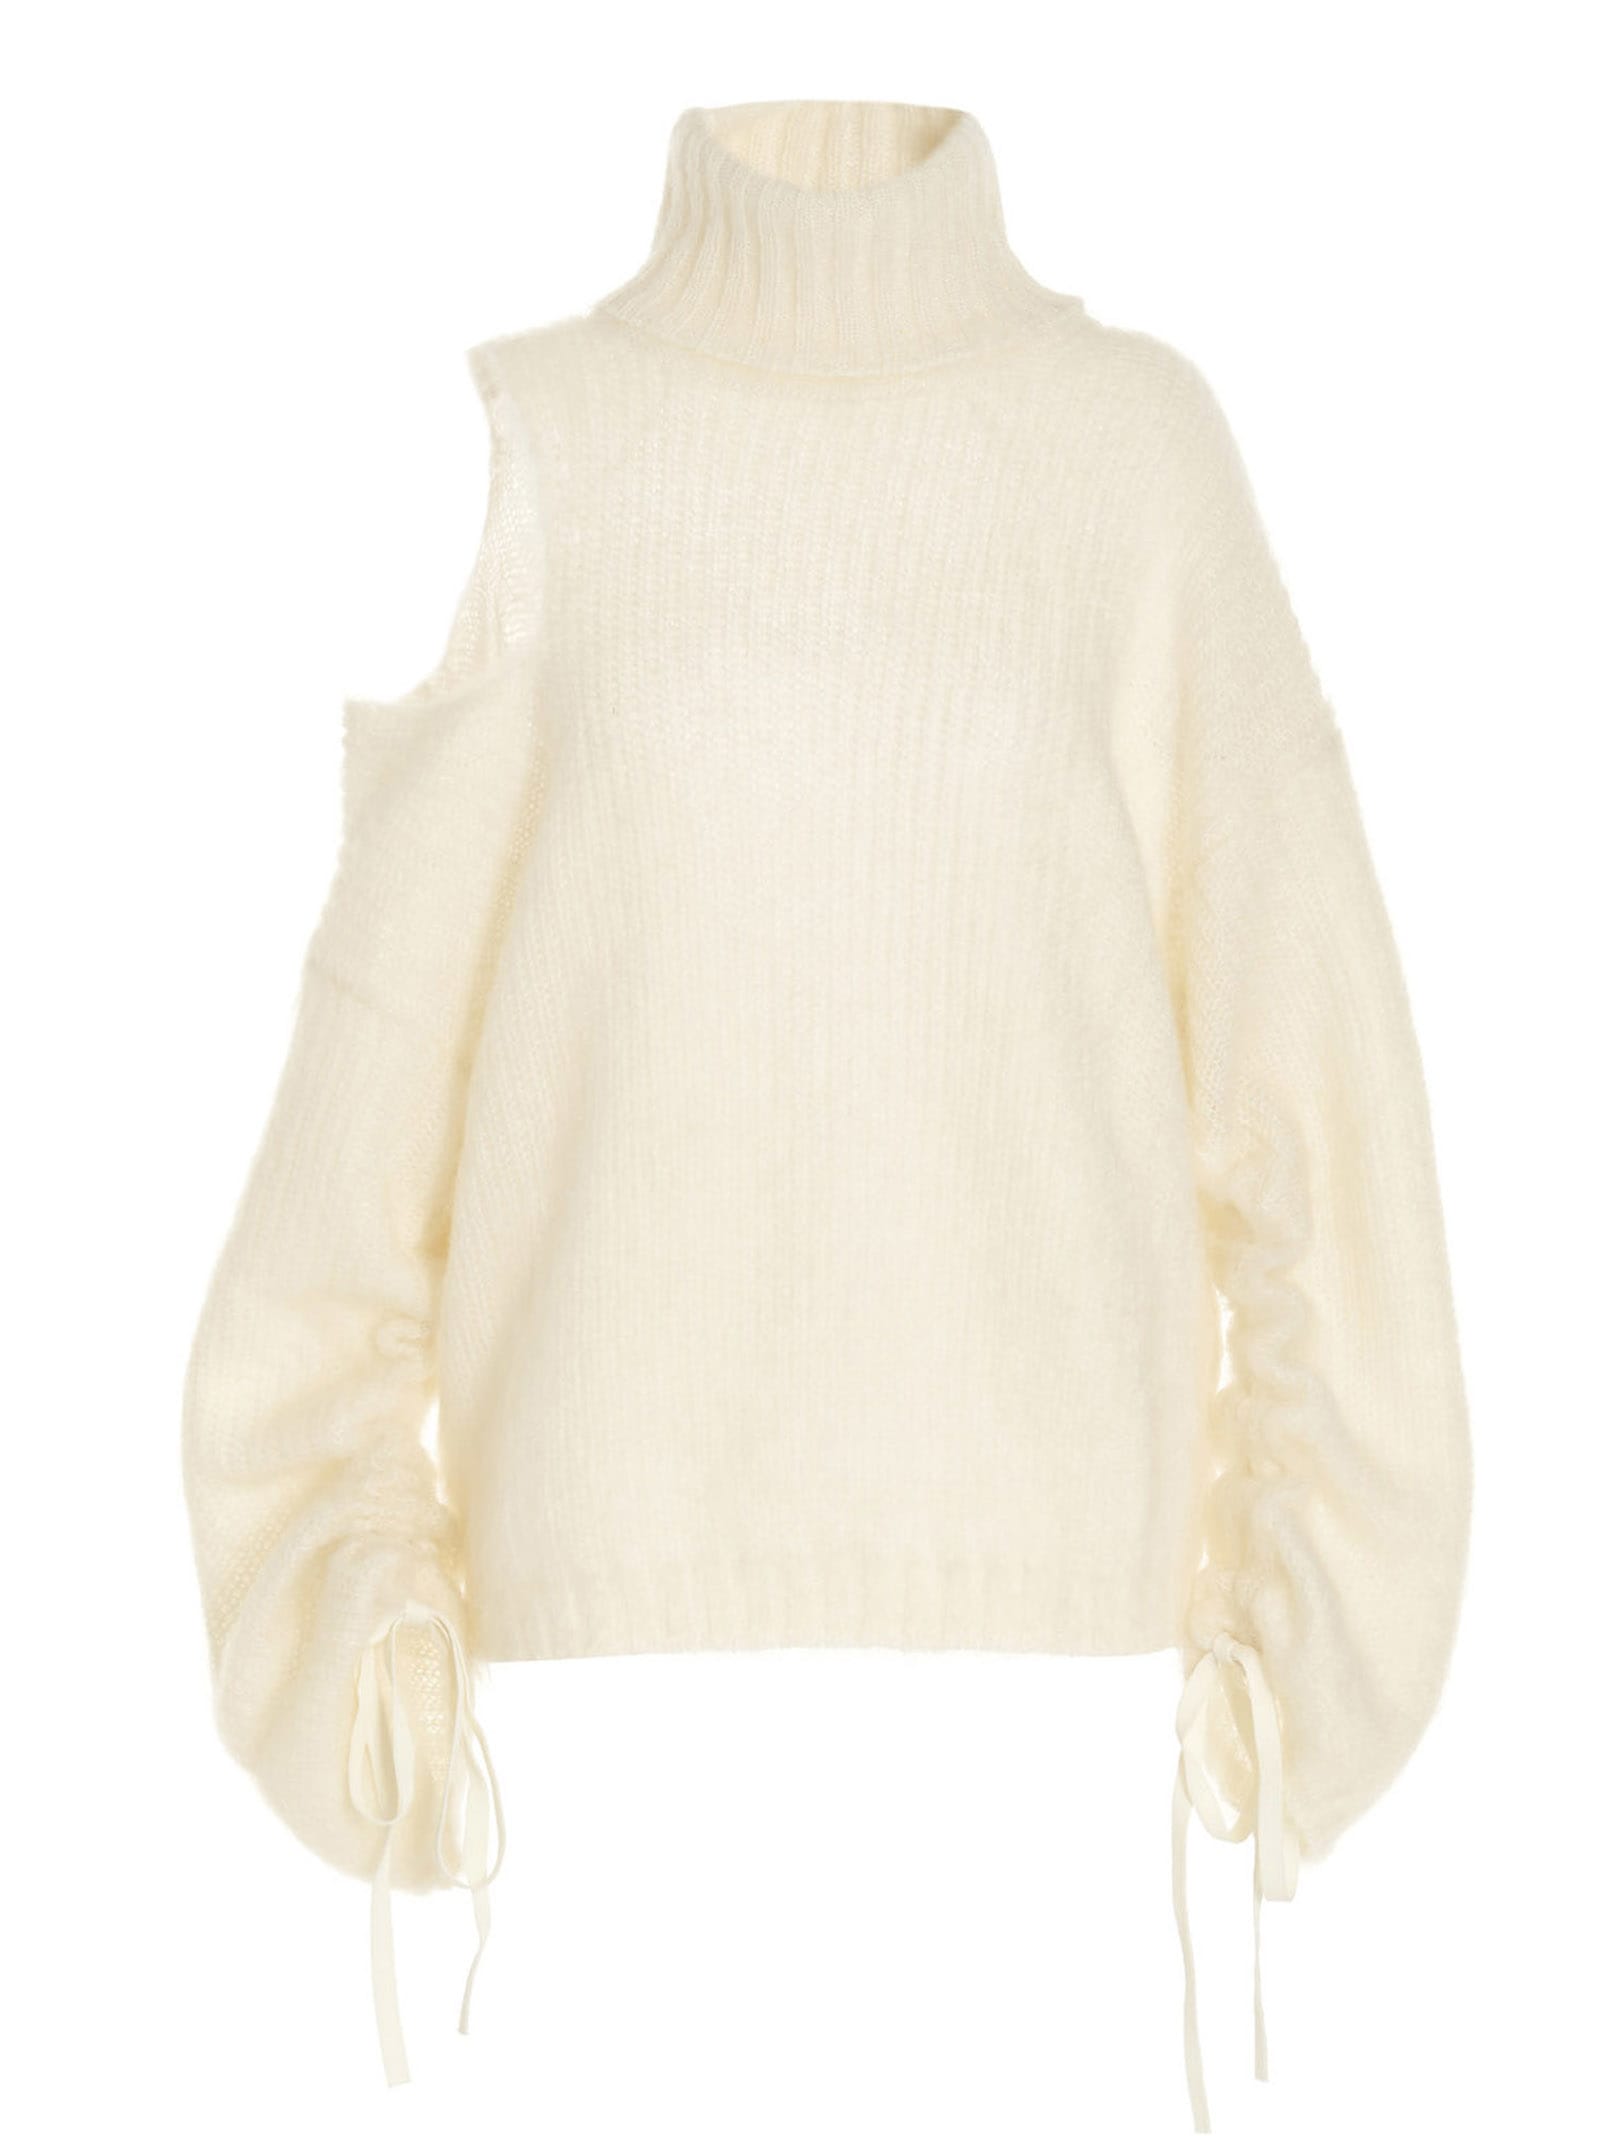 ANDREADAMO Cut Out Sweater With Lacing